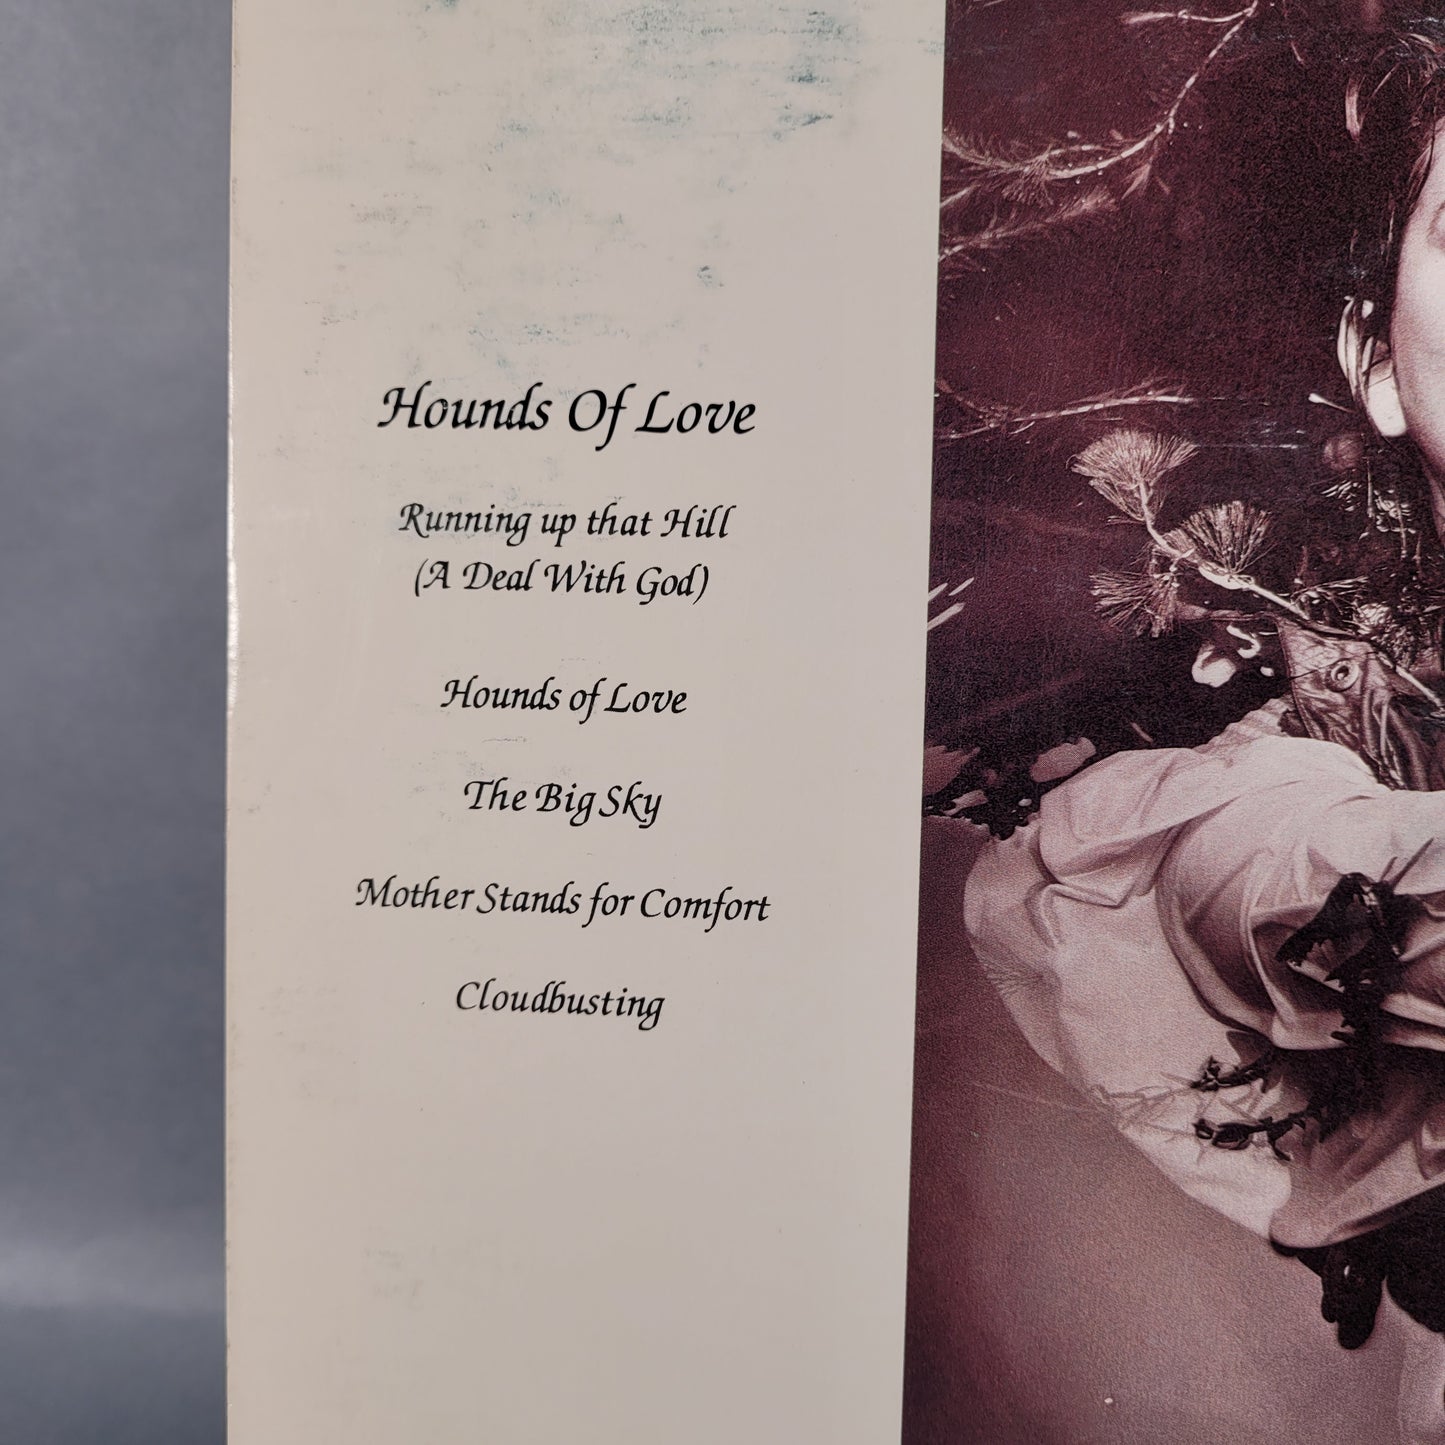 Original Press of Kate Bush Hounds of Love Vinyl Record Album Featured In Stranger Things Netflix